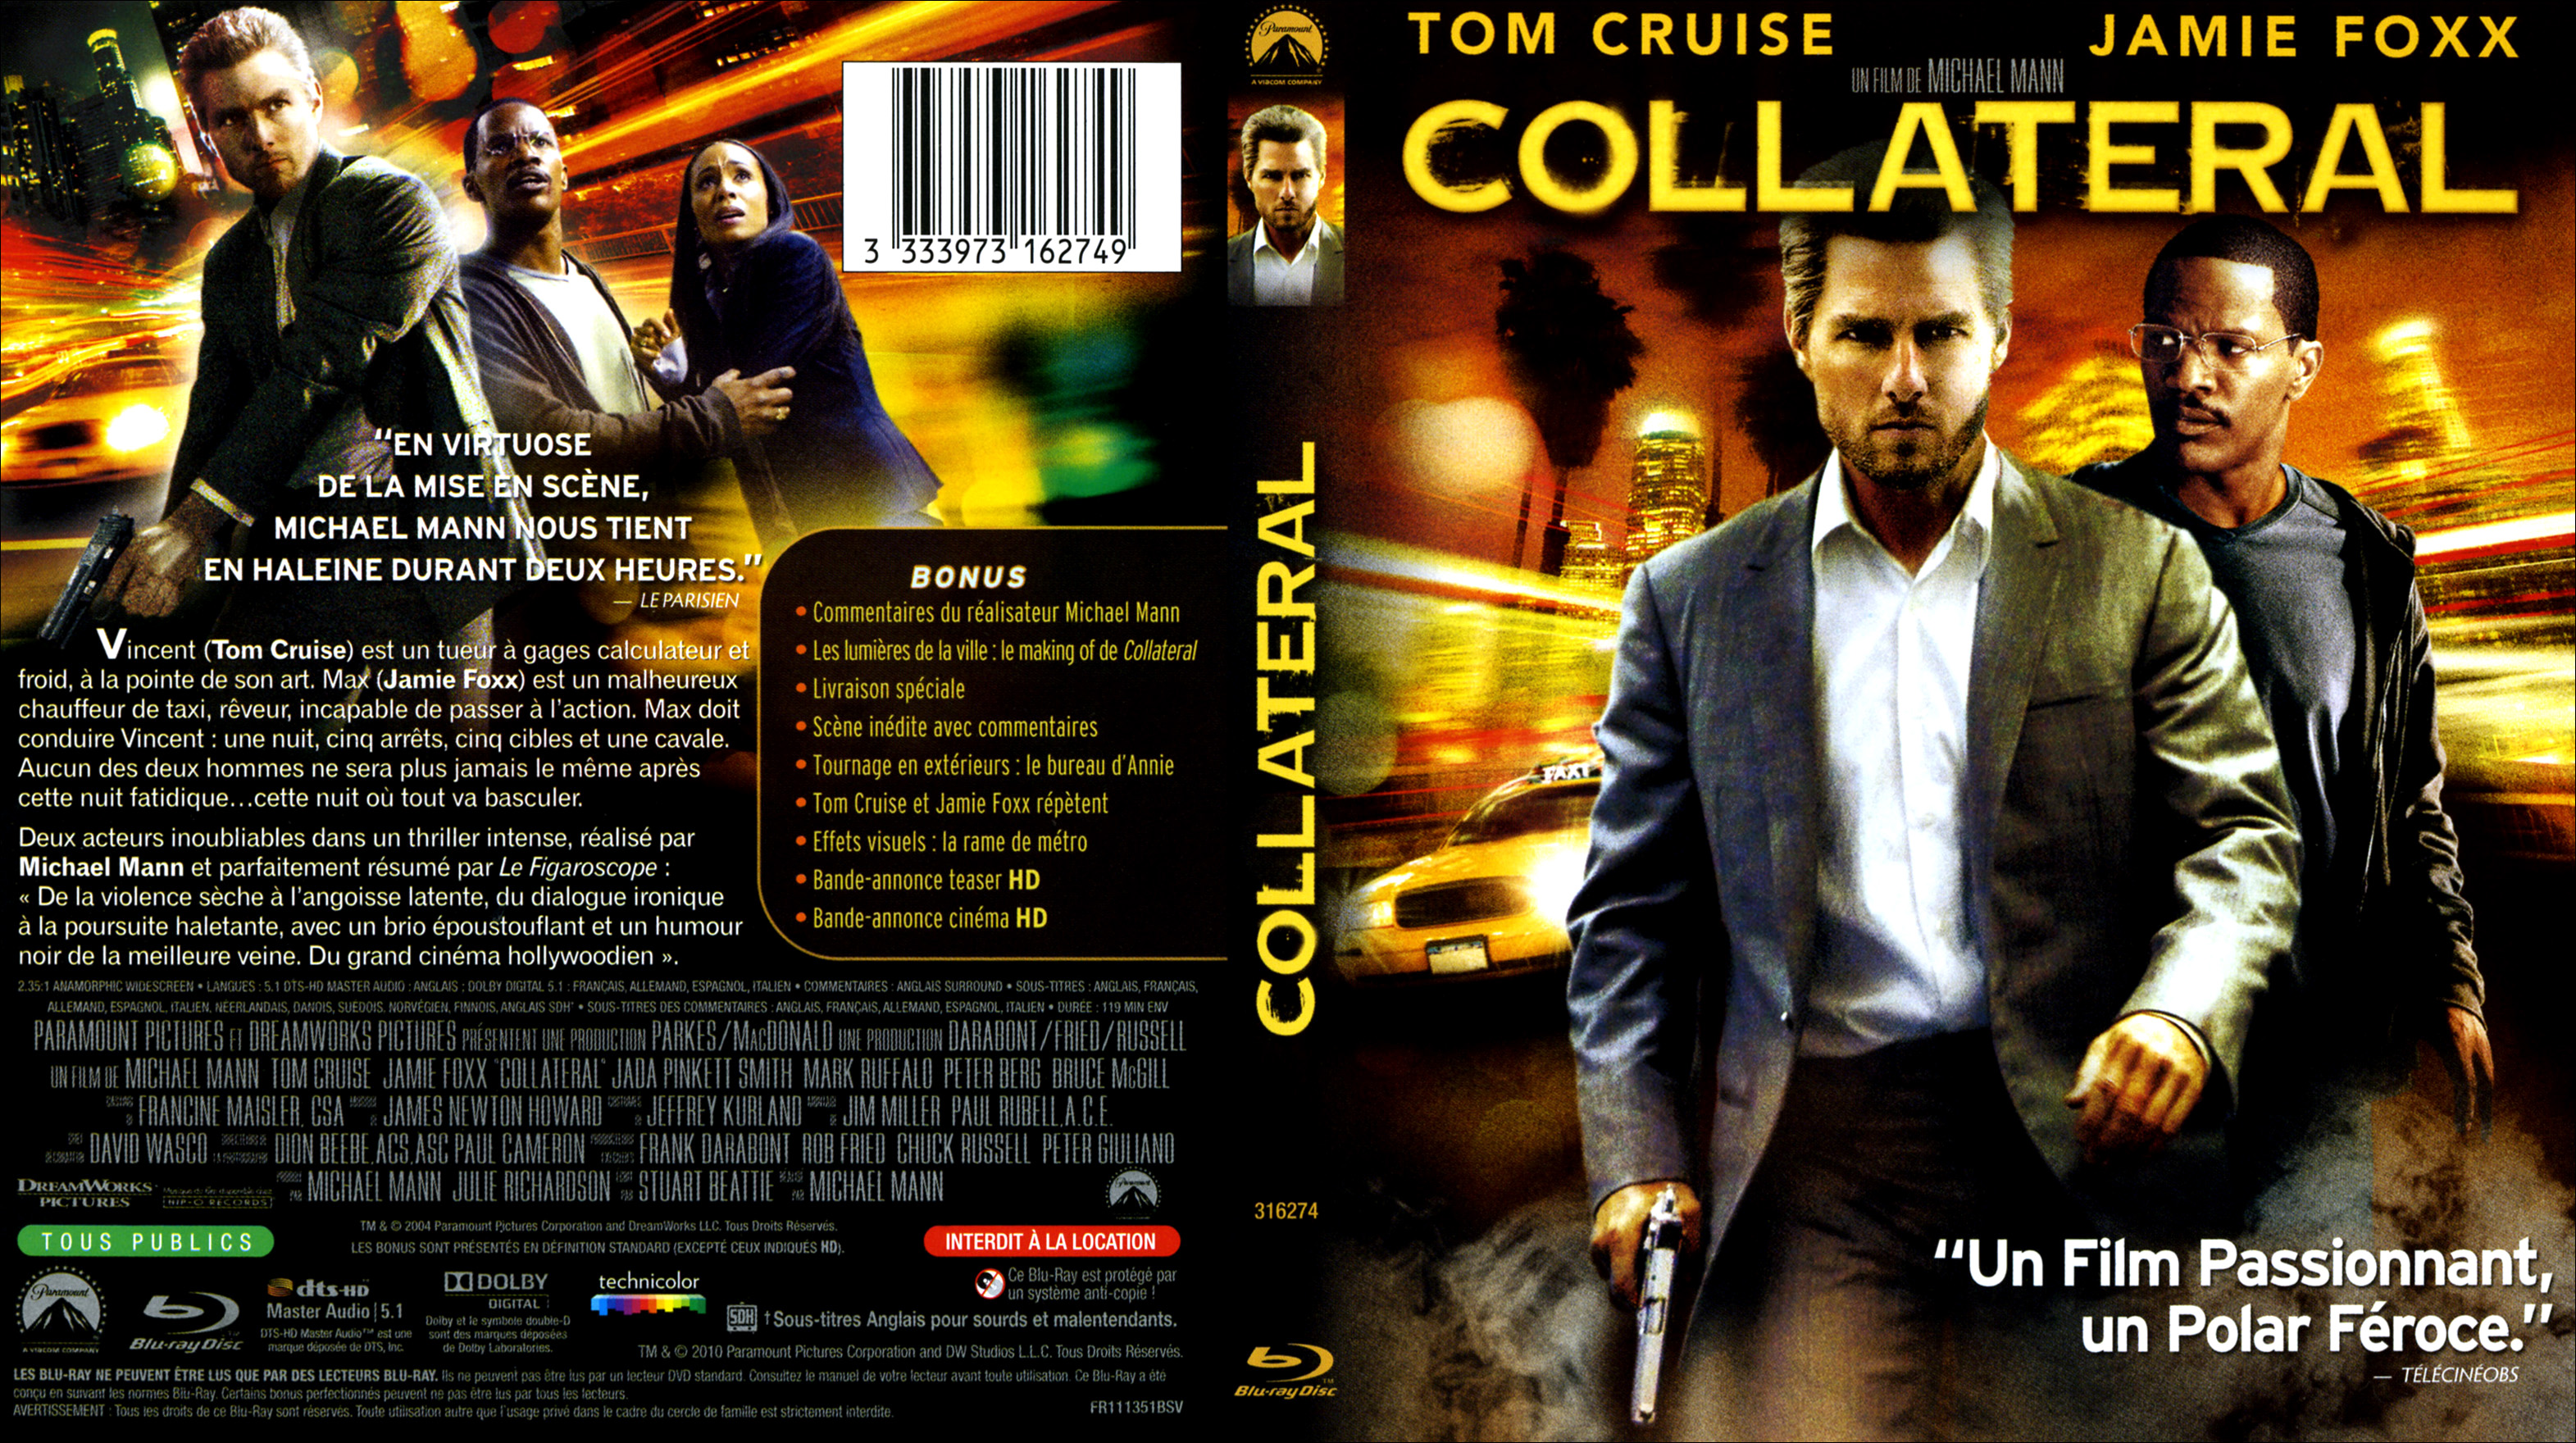 Jaquette DVD Collateral (BLU-RAY)